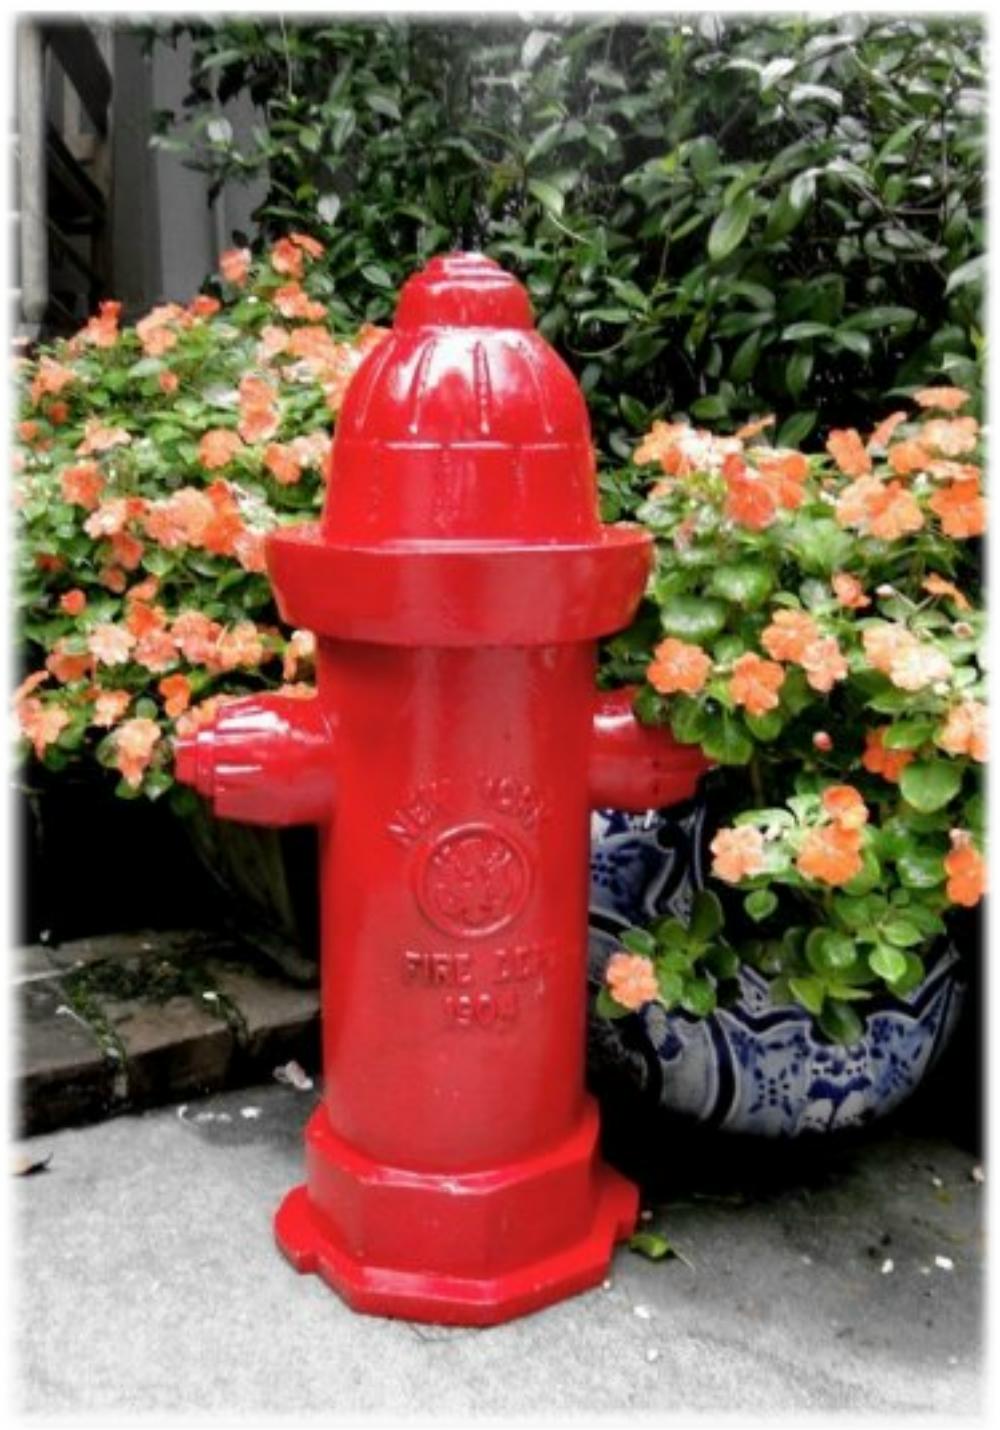 Yellow Fire Hydrant Heavy Full Size Antique Replica Dated 1904 Vintage Style 